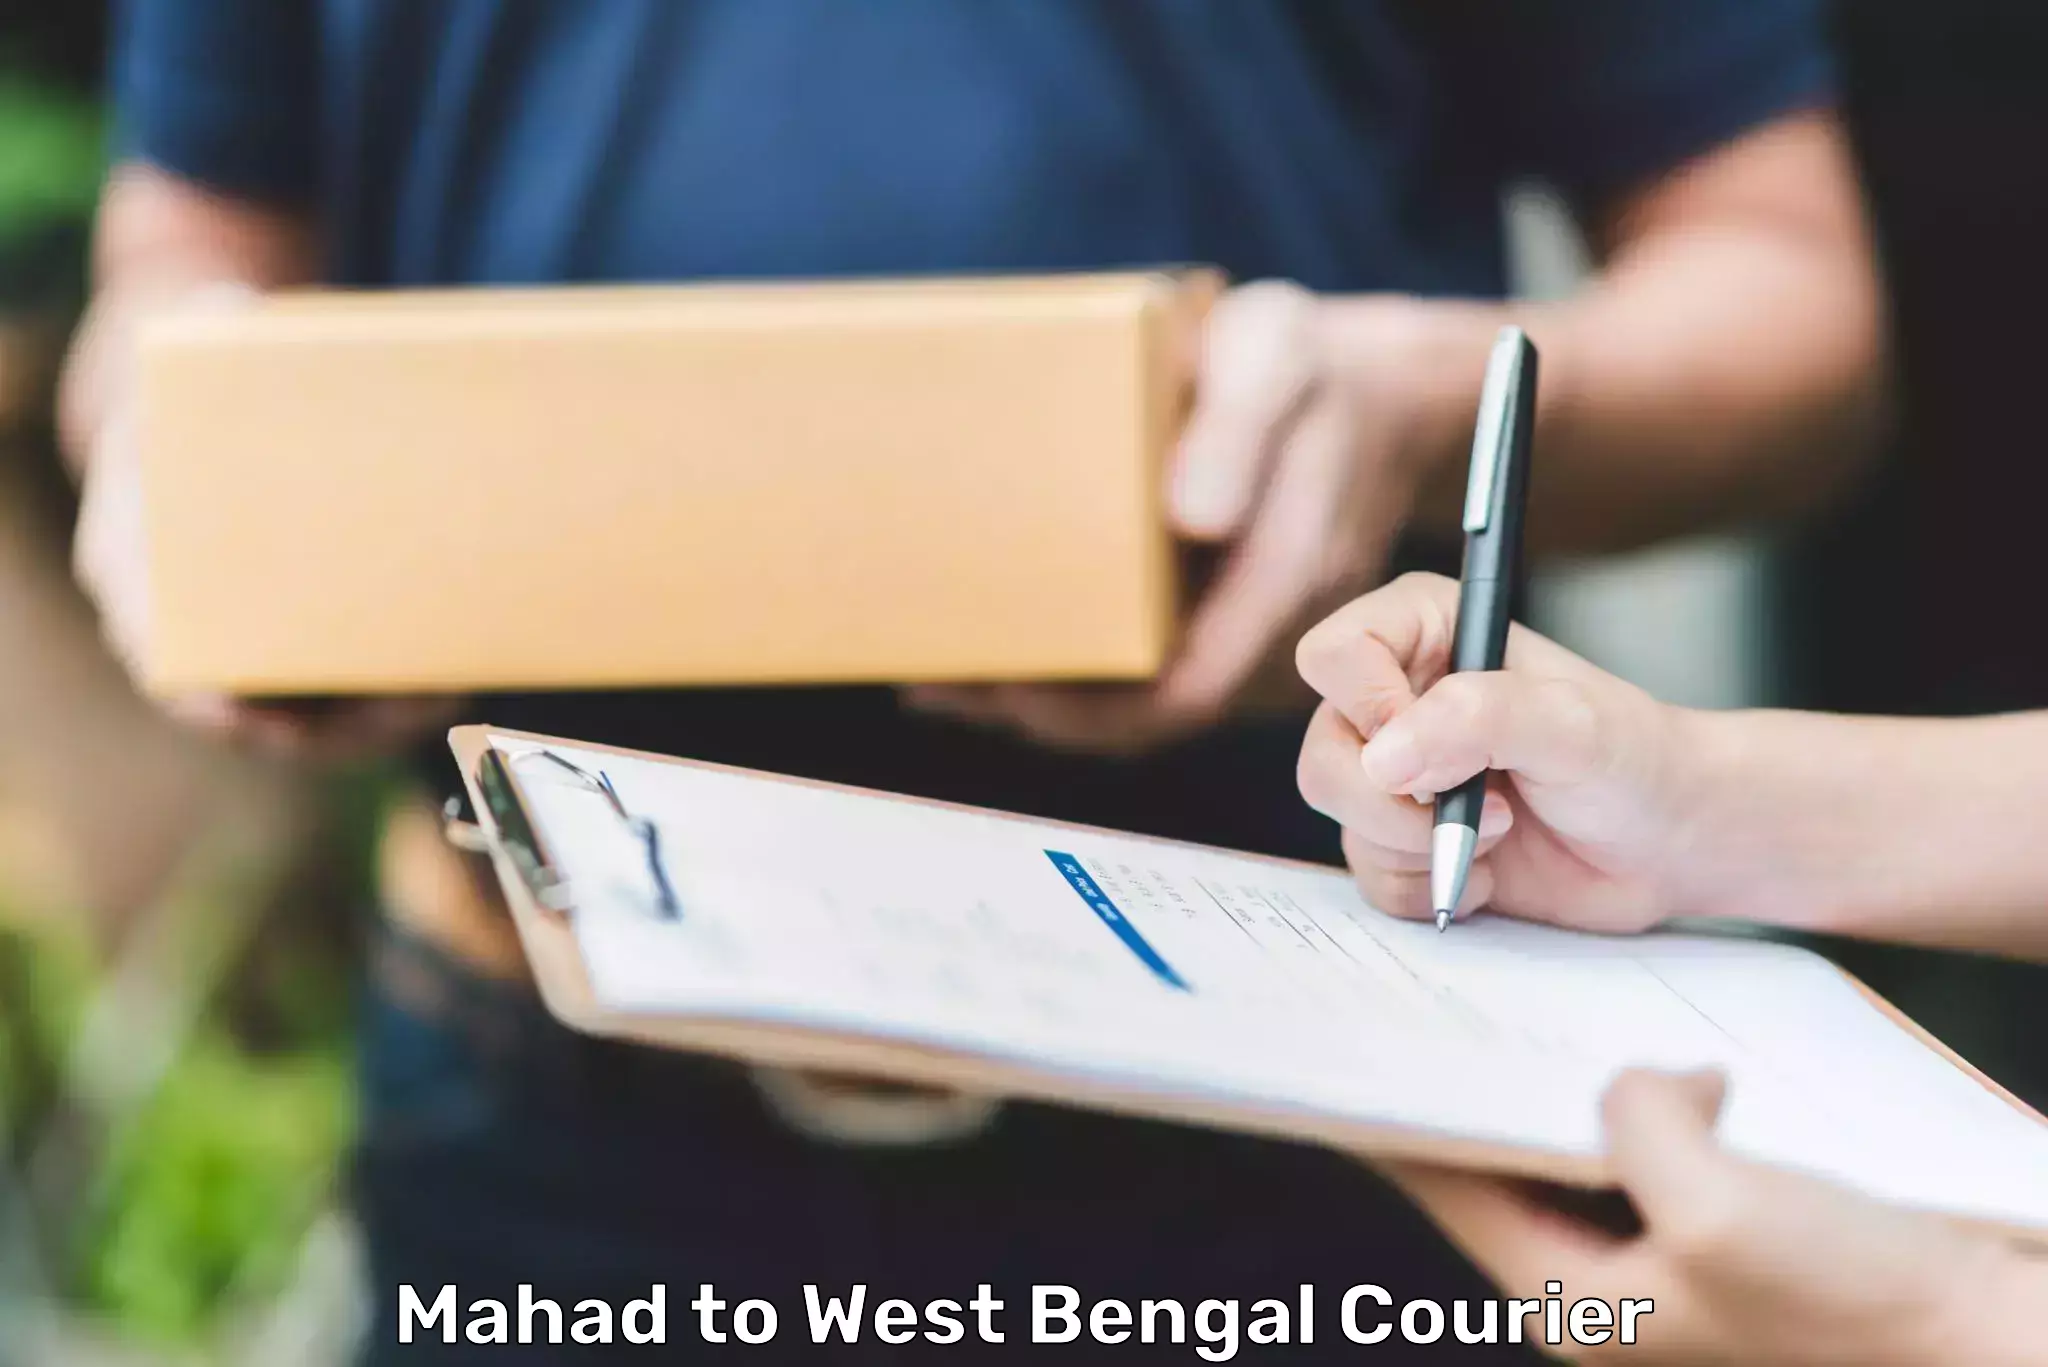 Delivery service partnership Mahad to West Bengal